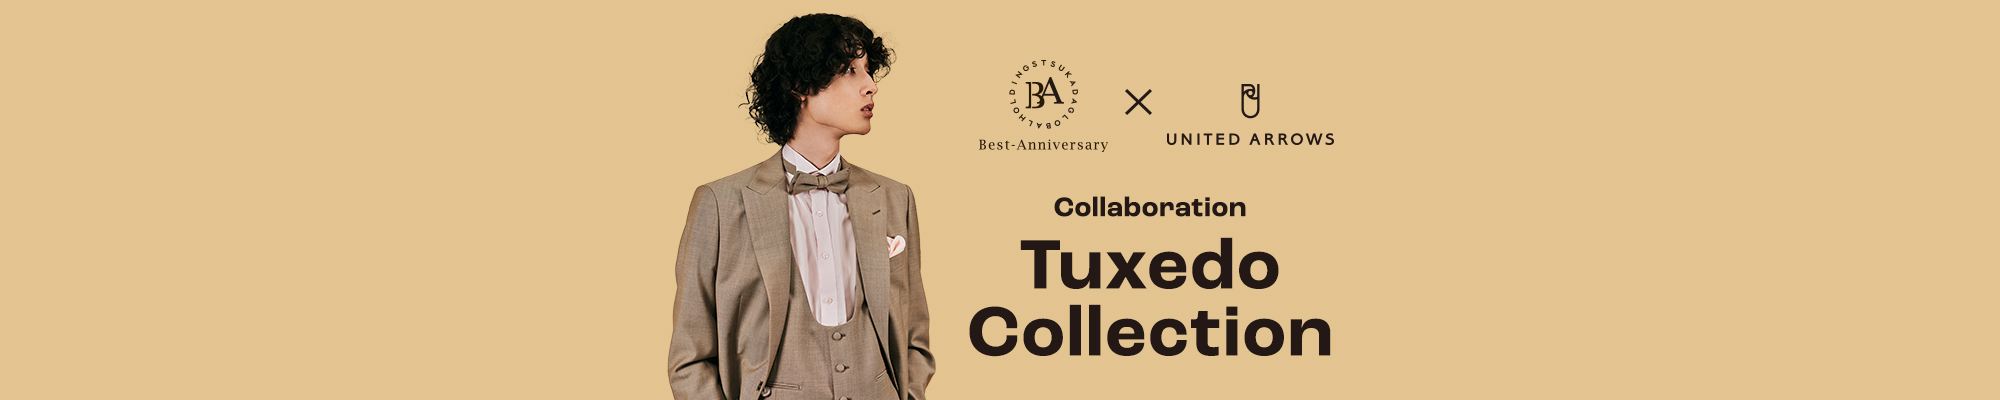 Best-Anniversary × UNITED ARROWS Collaboration Tuxedo Collection